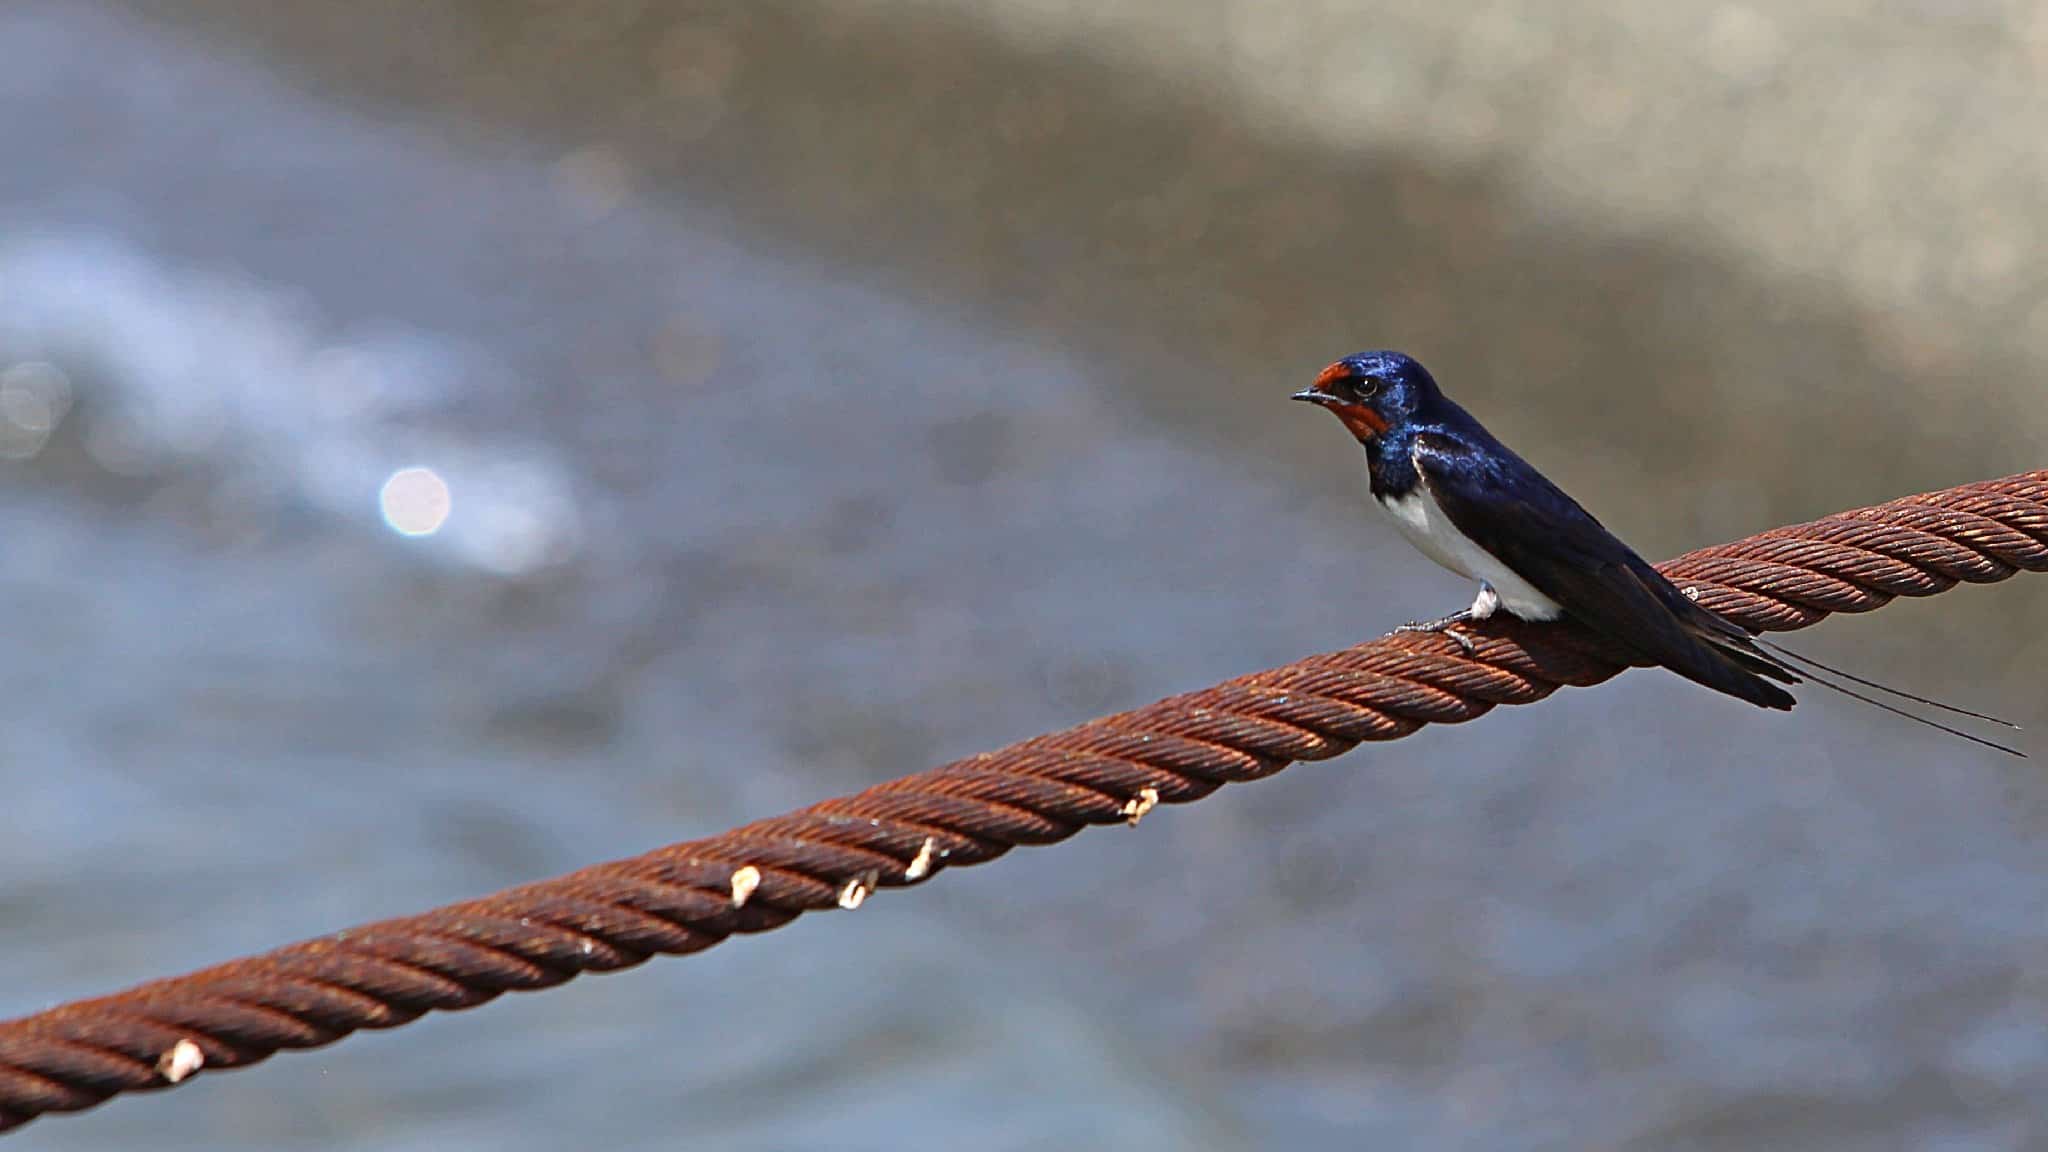 Info Shymkent - A barn swallow is sitting on a iron rope at Irtysh river in Kazakhstan.